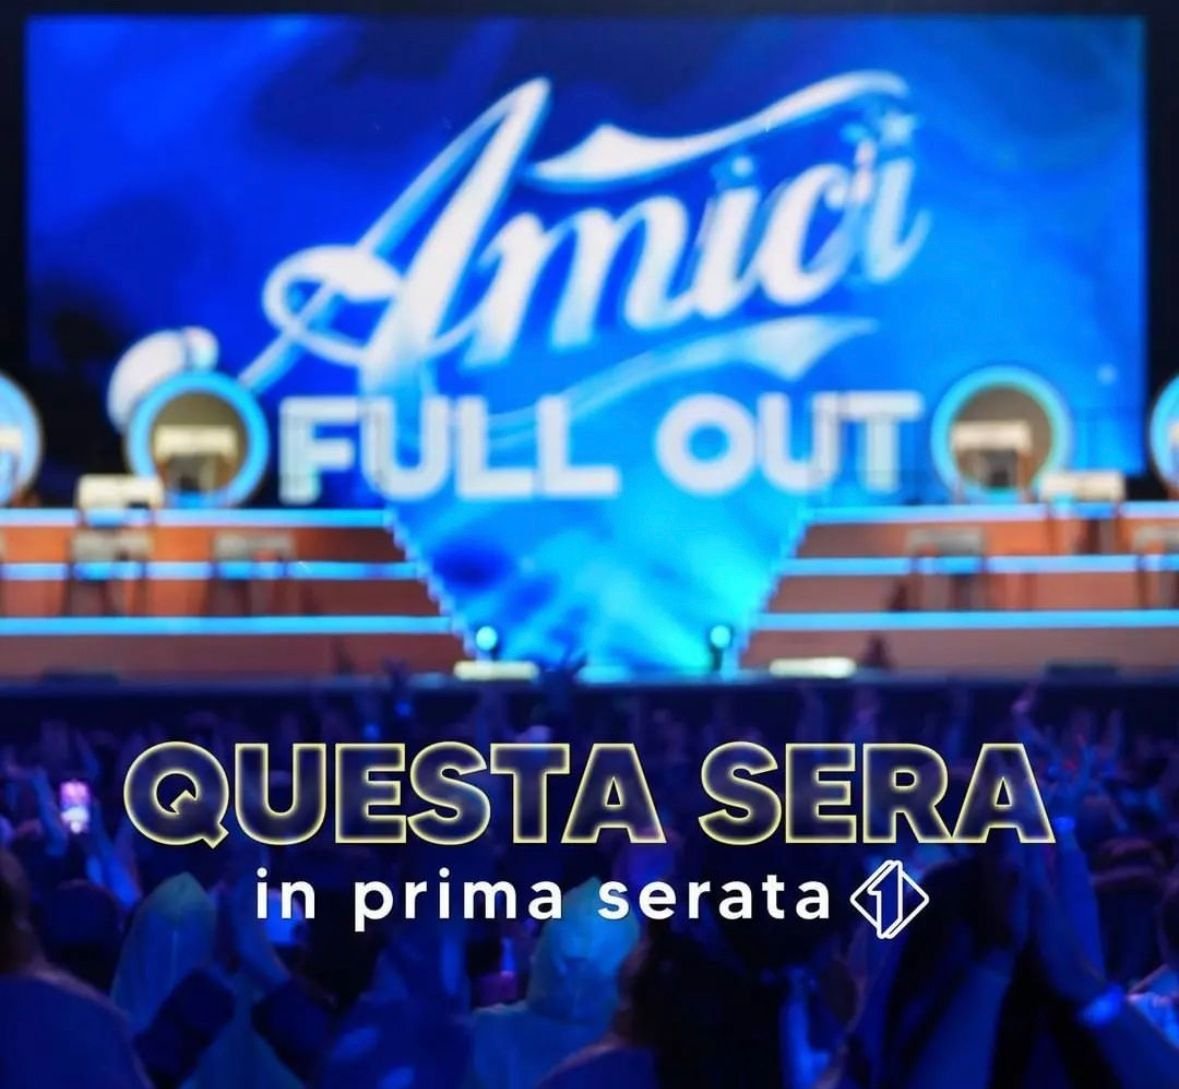 Amici-full out